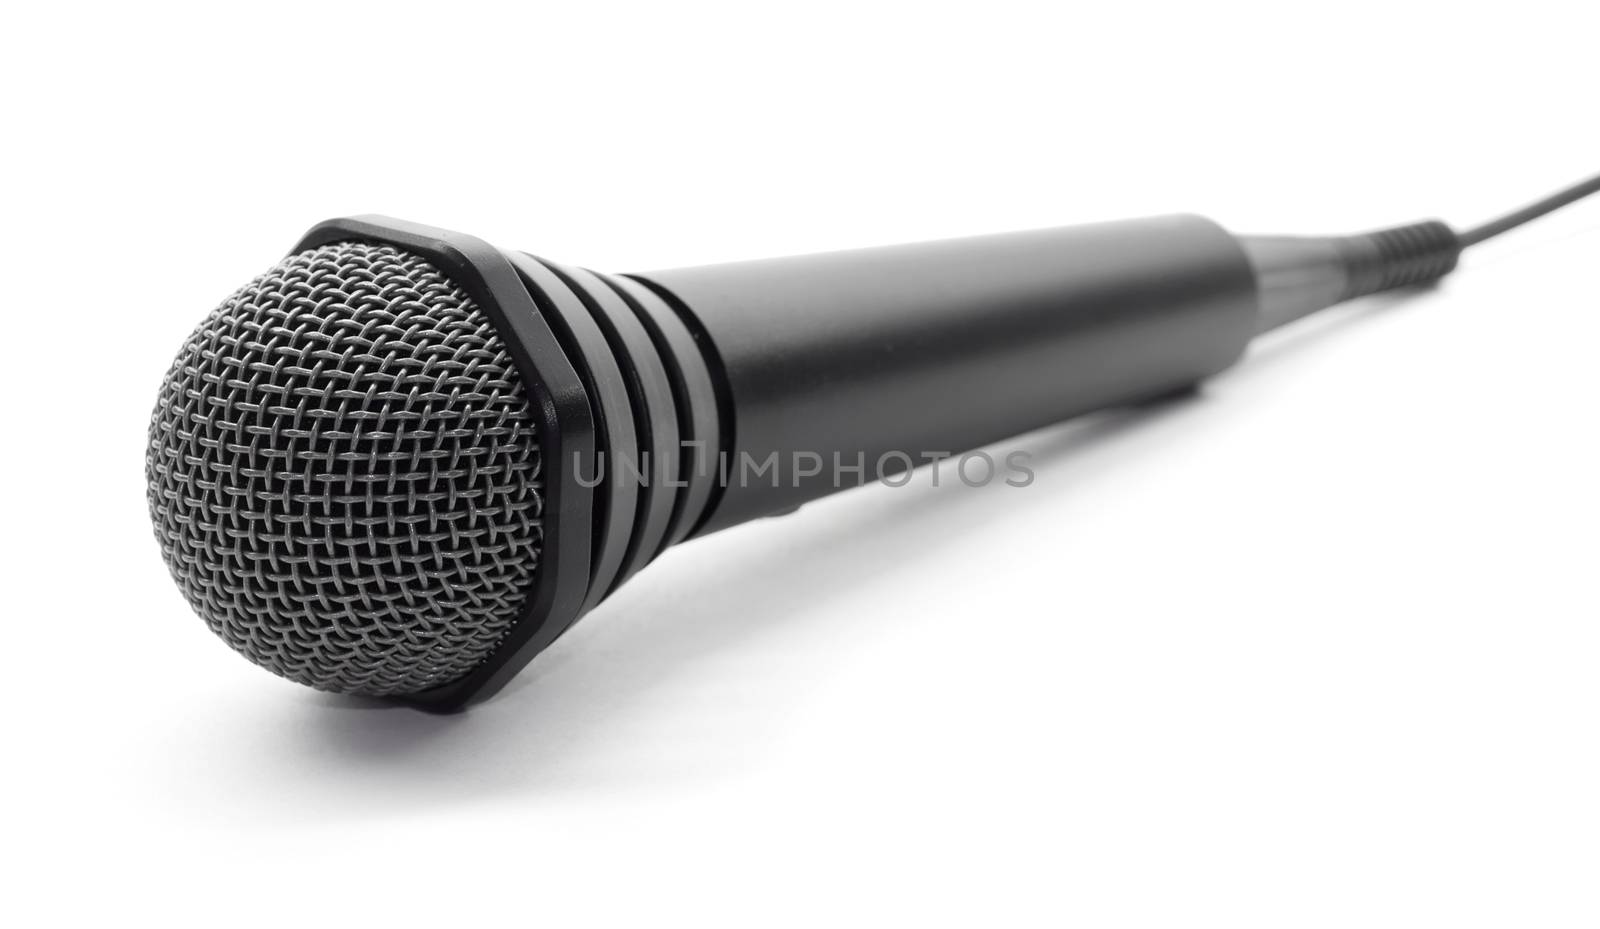 Plugged in black microphone on white background